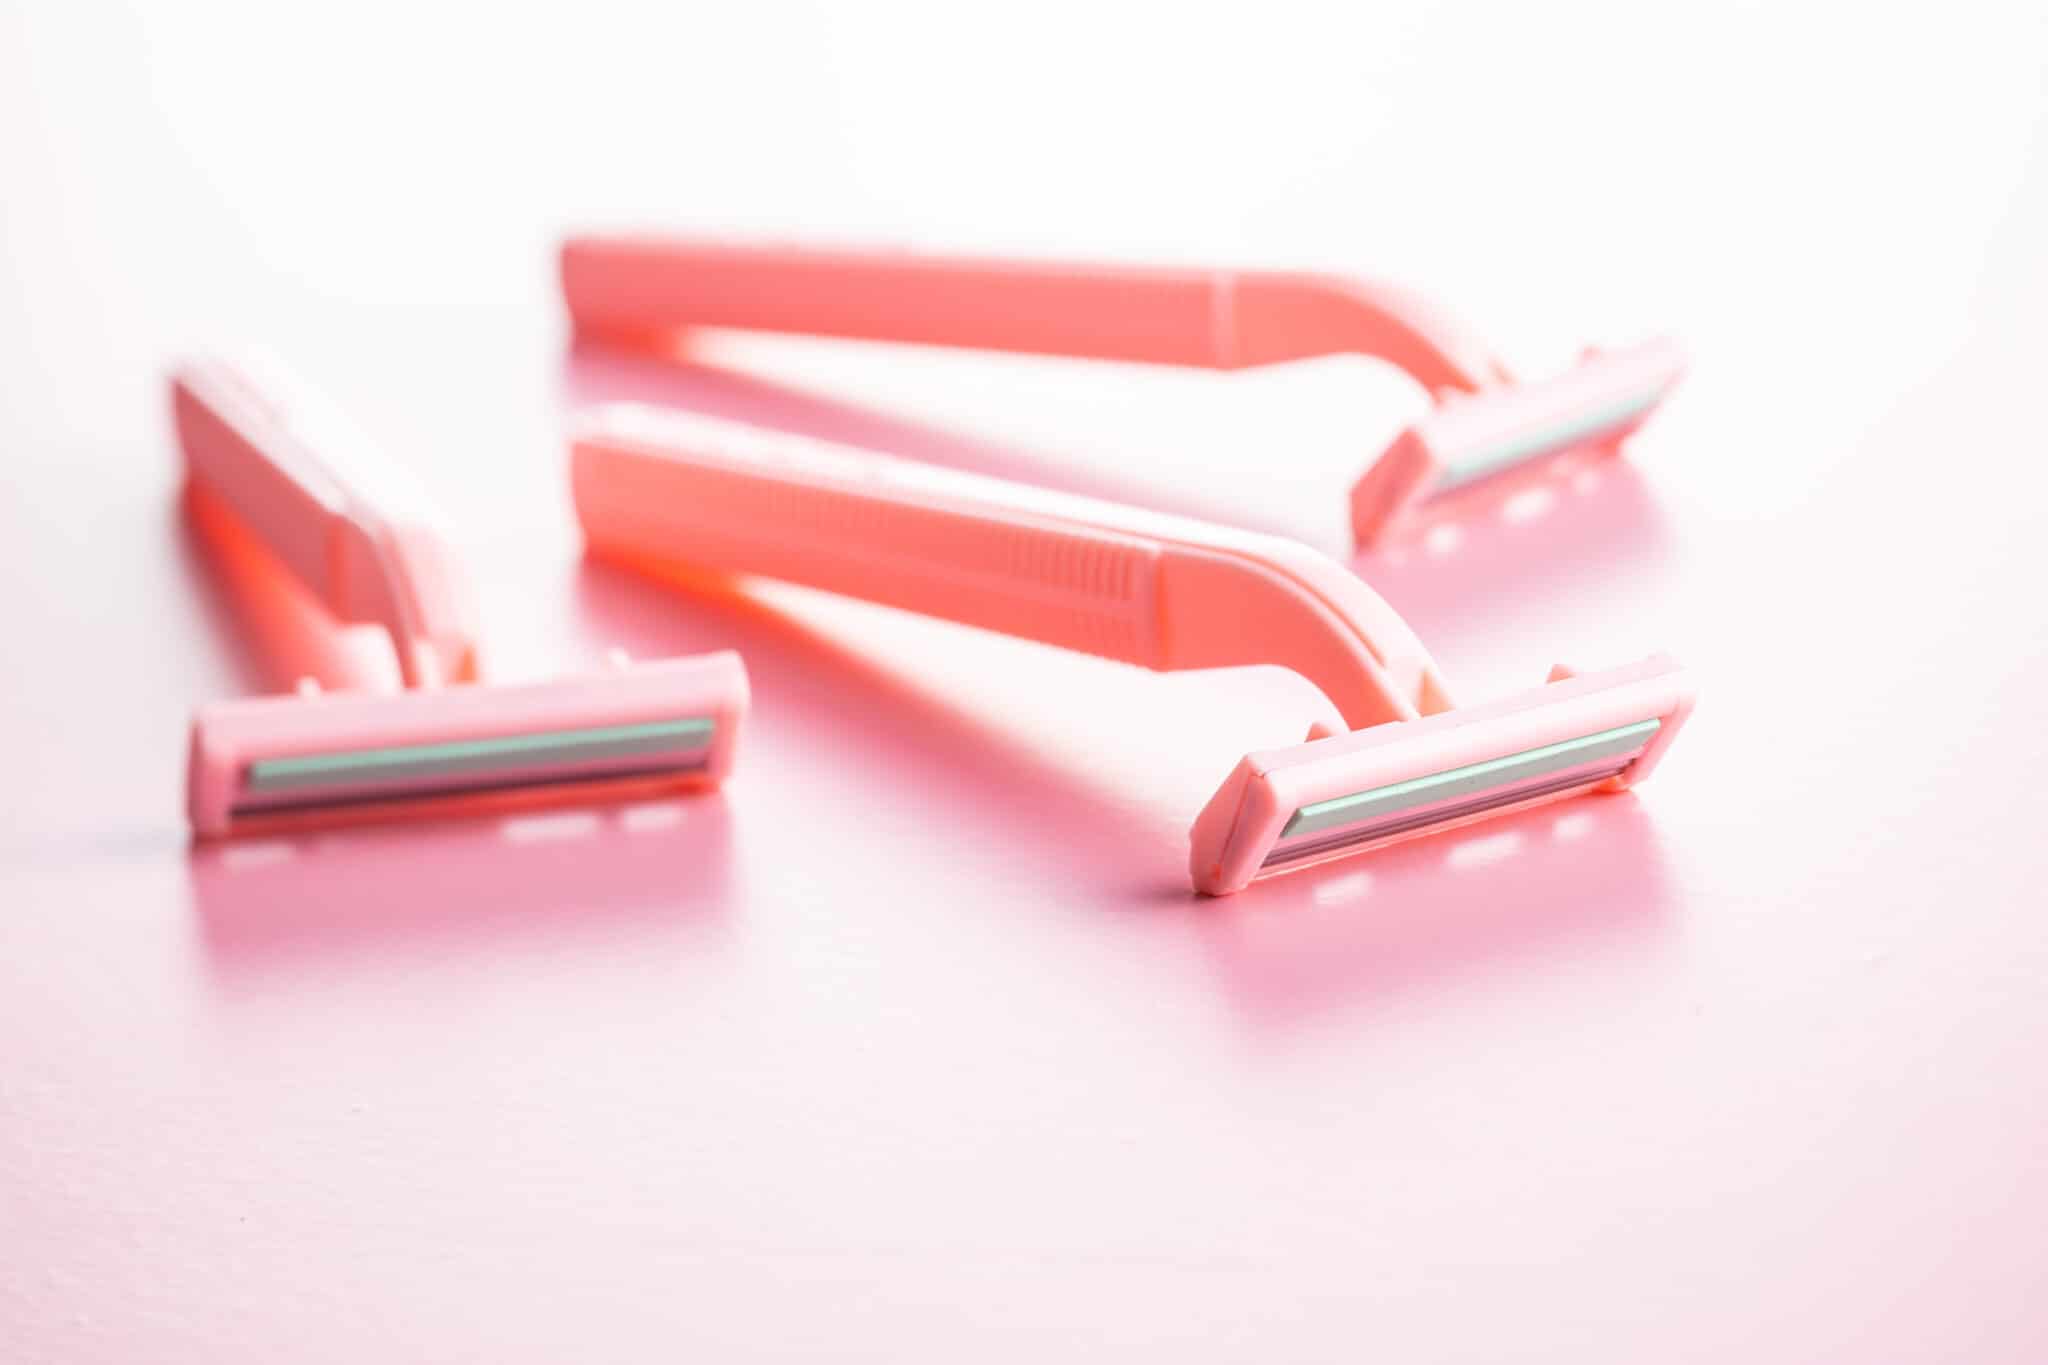 Even razors have been made pink for women.